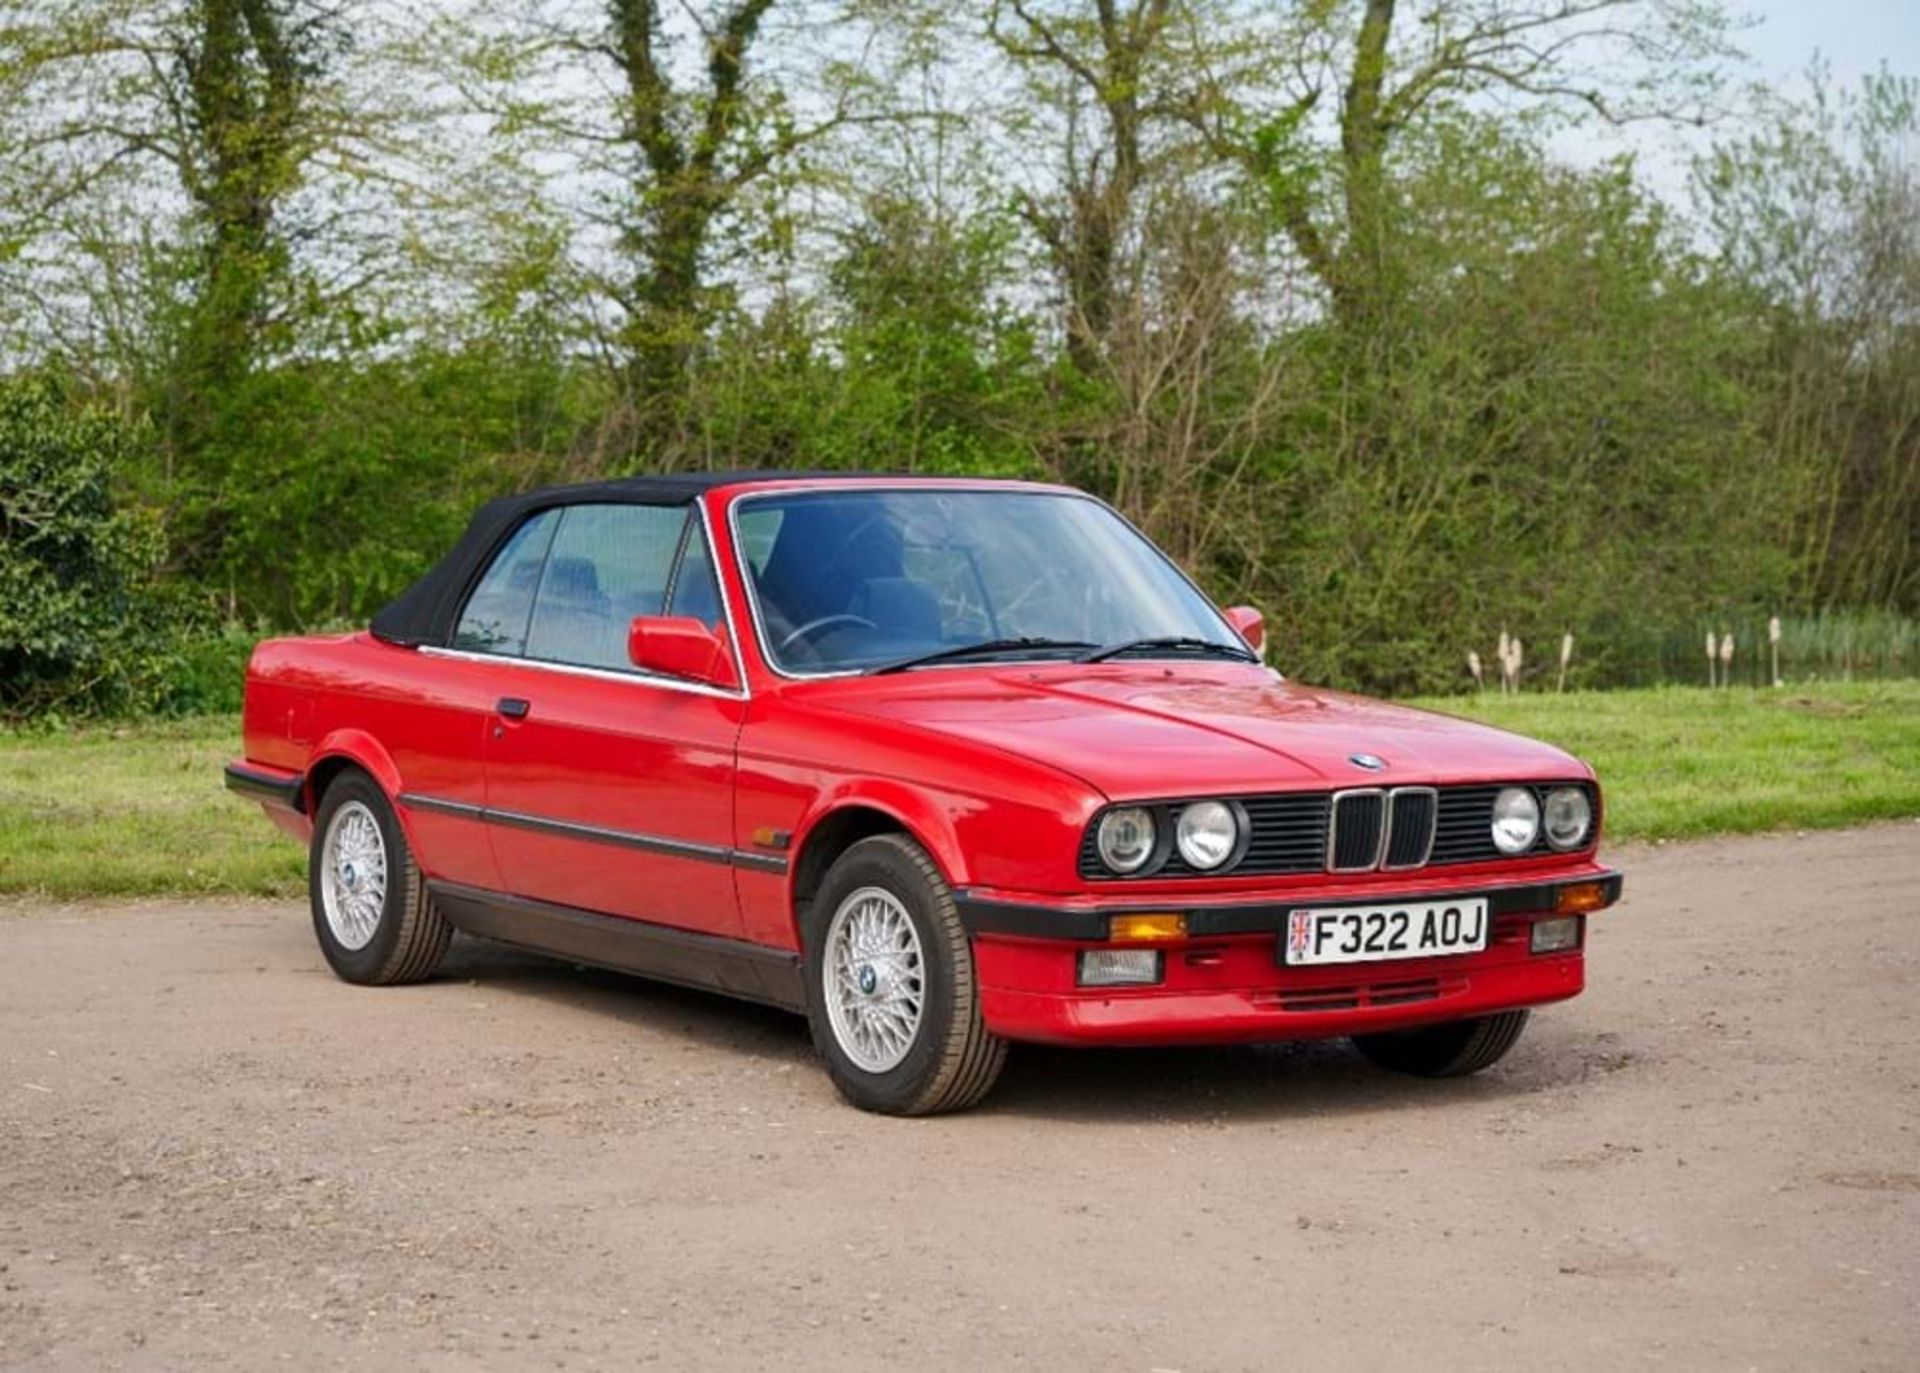 1989 BMW 325i Convertible - Image 6 of 10